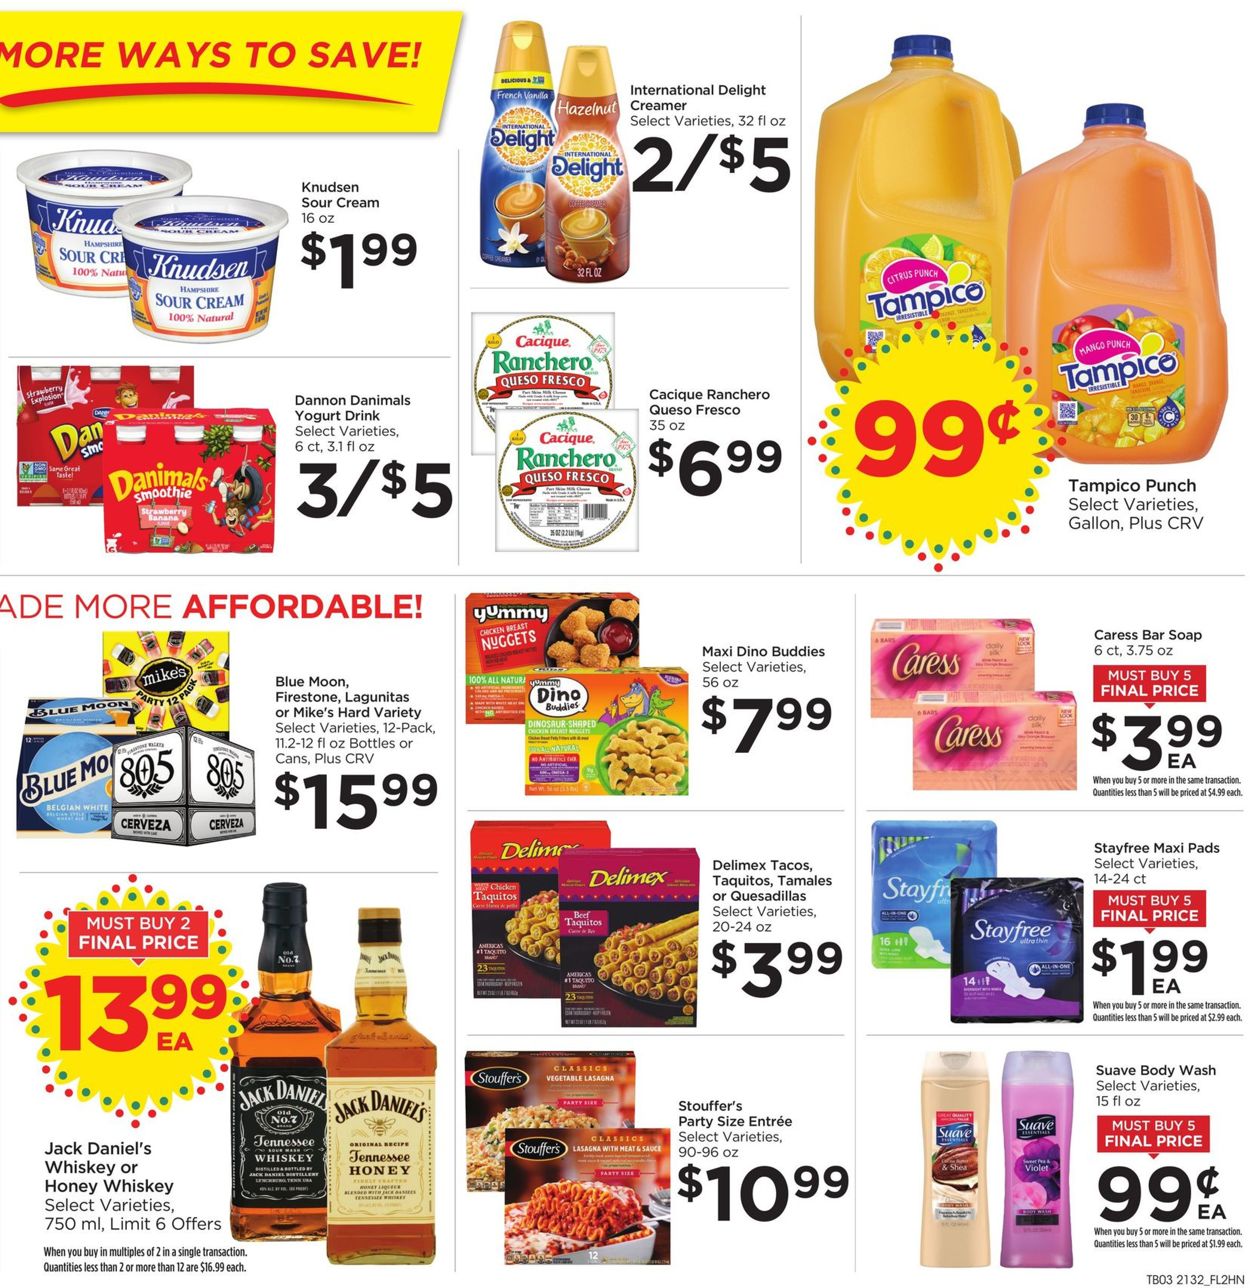 Foods Co. Ad from 09/08/2021